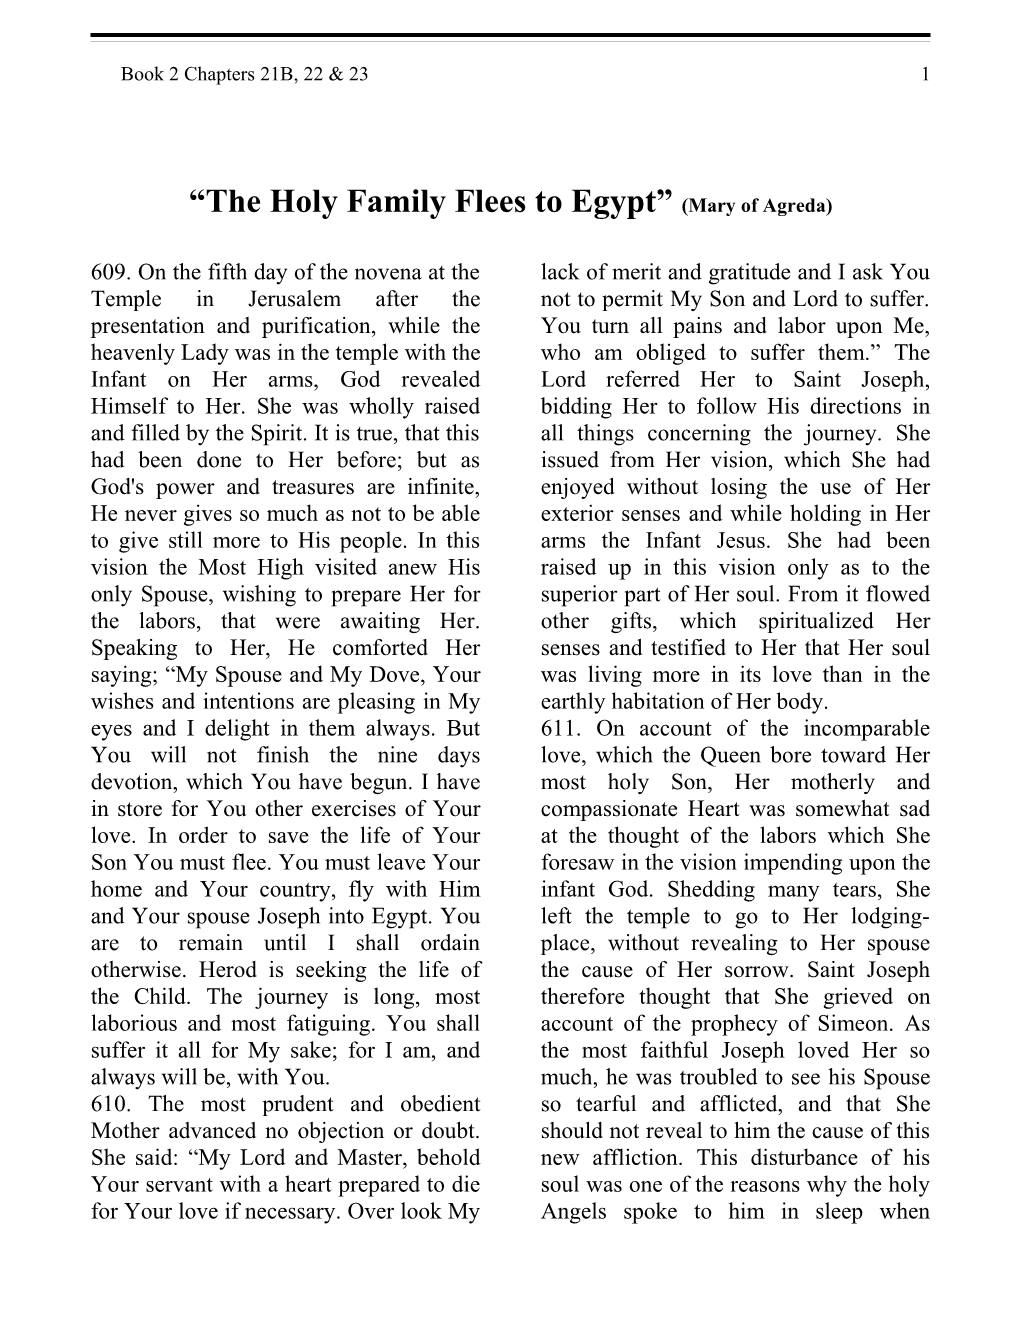 The Holy Family Flees to Egypt (Mary of Agreda)